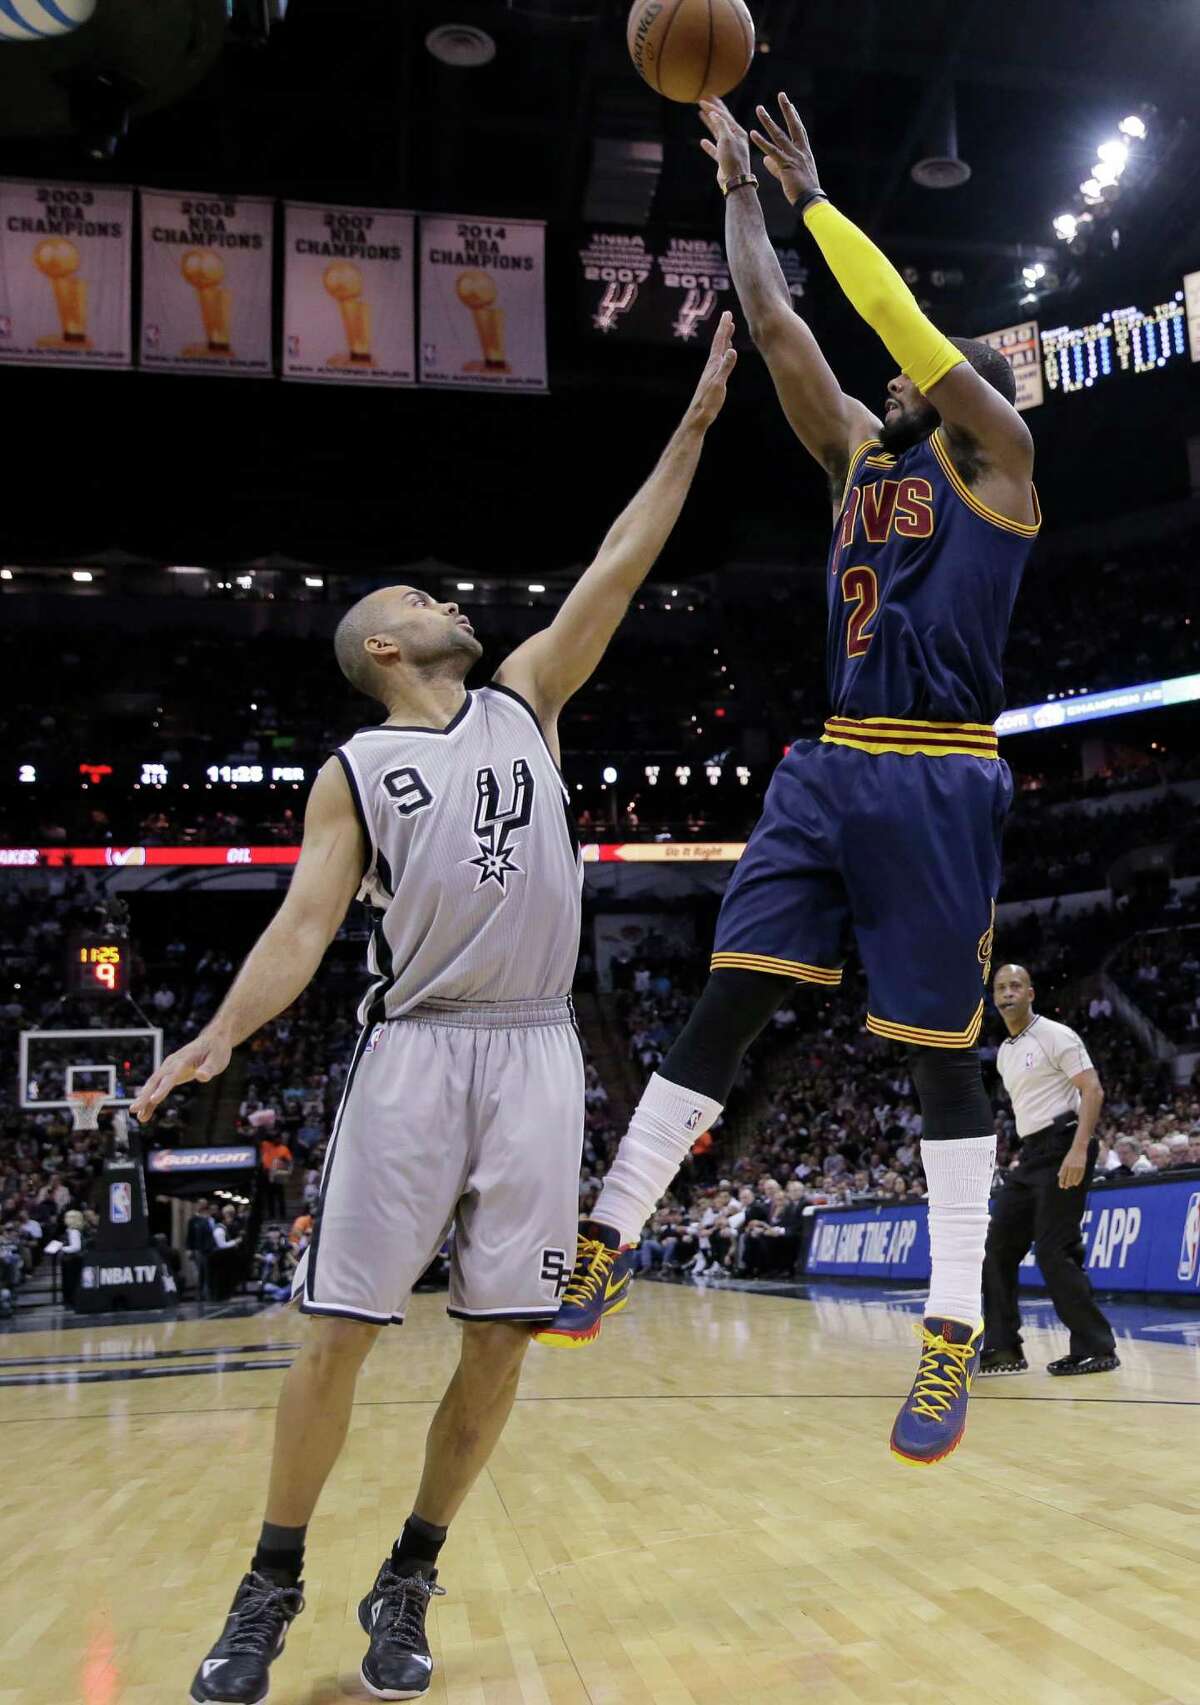 Cavaliers’ Kyrie Irving shoots over the Spurs’ Tony Parker during the first half on March 12, 2015, in San Antonio.